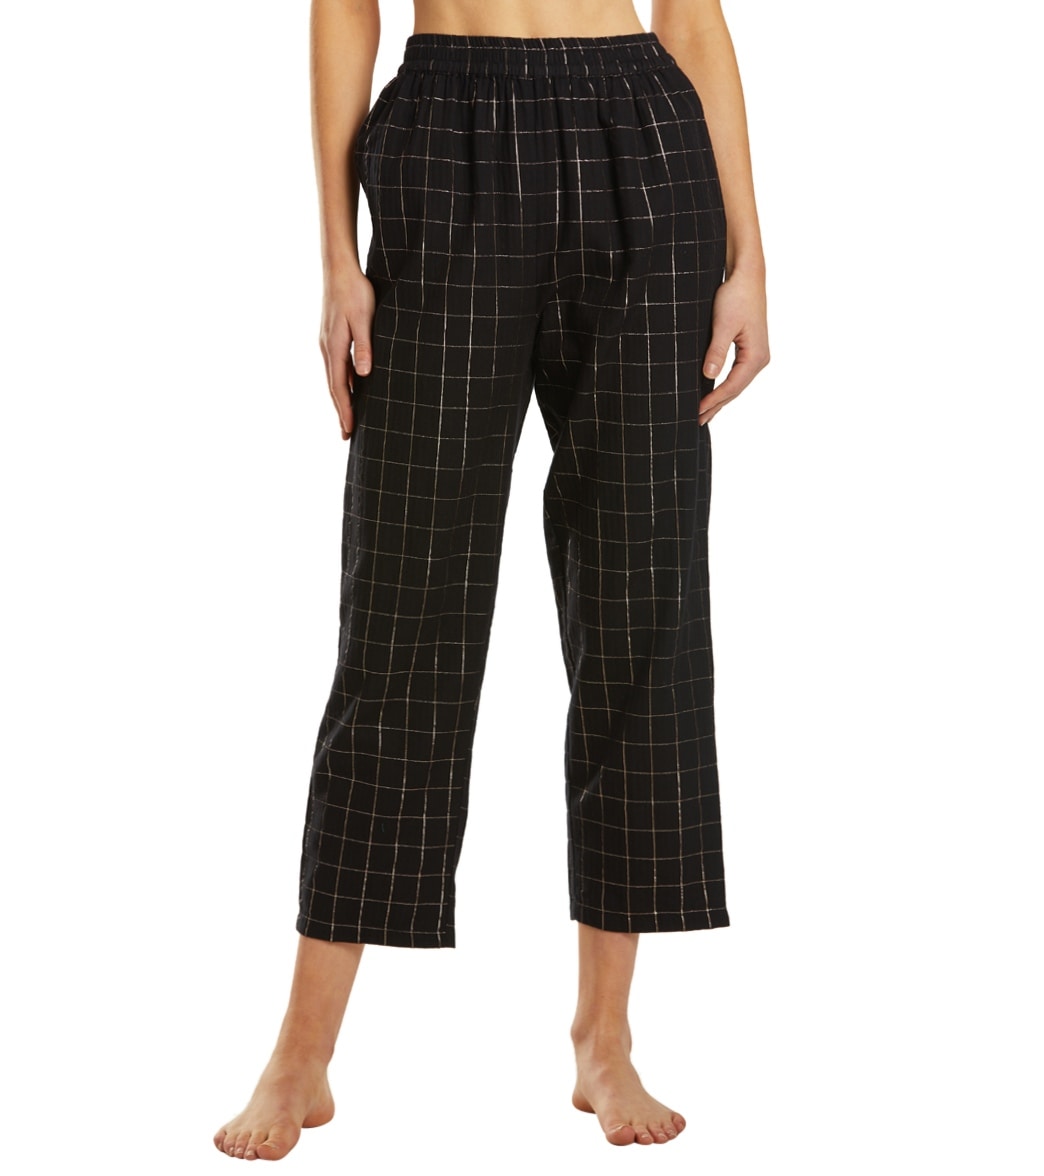 Sisstrevolution Down To Business Pants - Black Large Cotton/Polyester - Swimoutlet.com